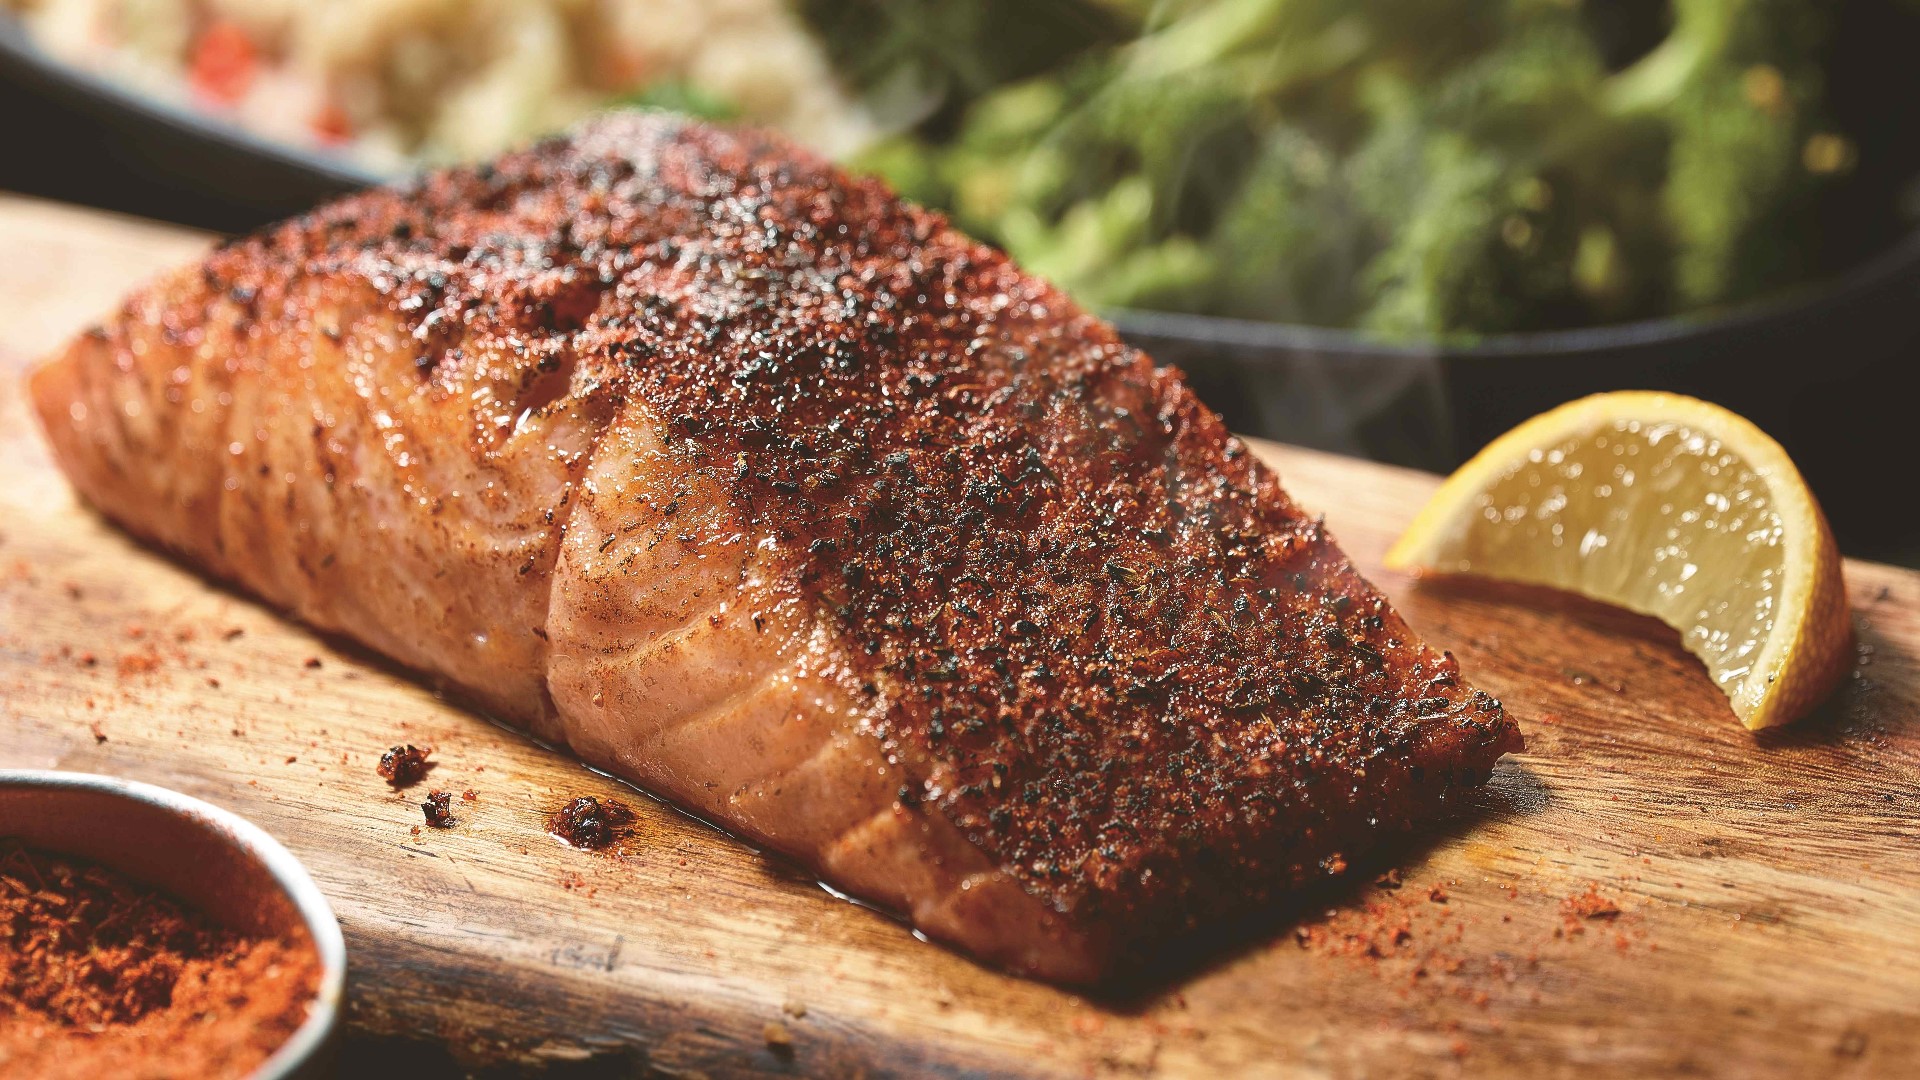 If you're goals for 2020 include healthy eating, then check out some of these cooking tips and recipes from a LongHorn Steakhouse Grillmaster.